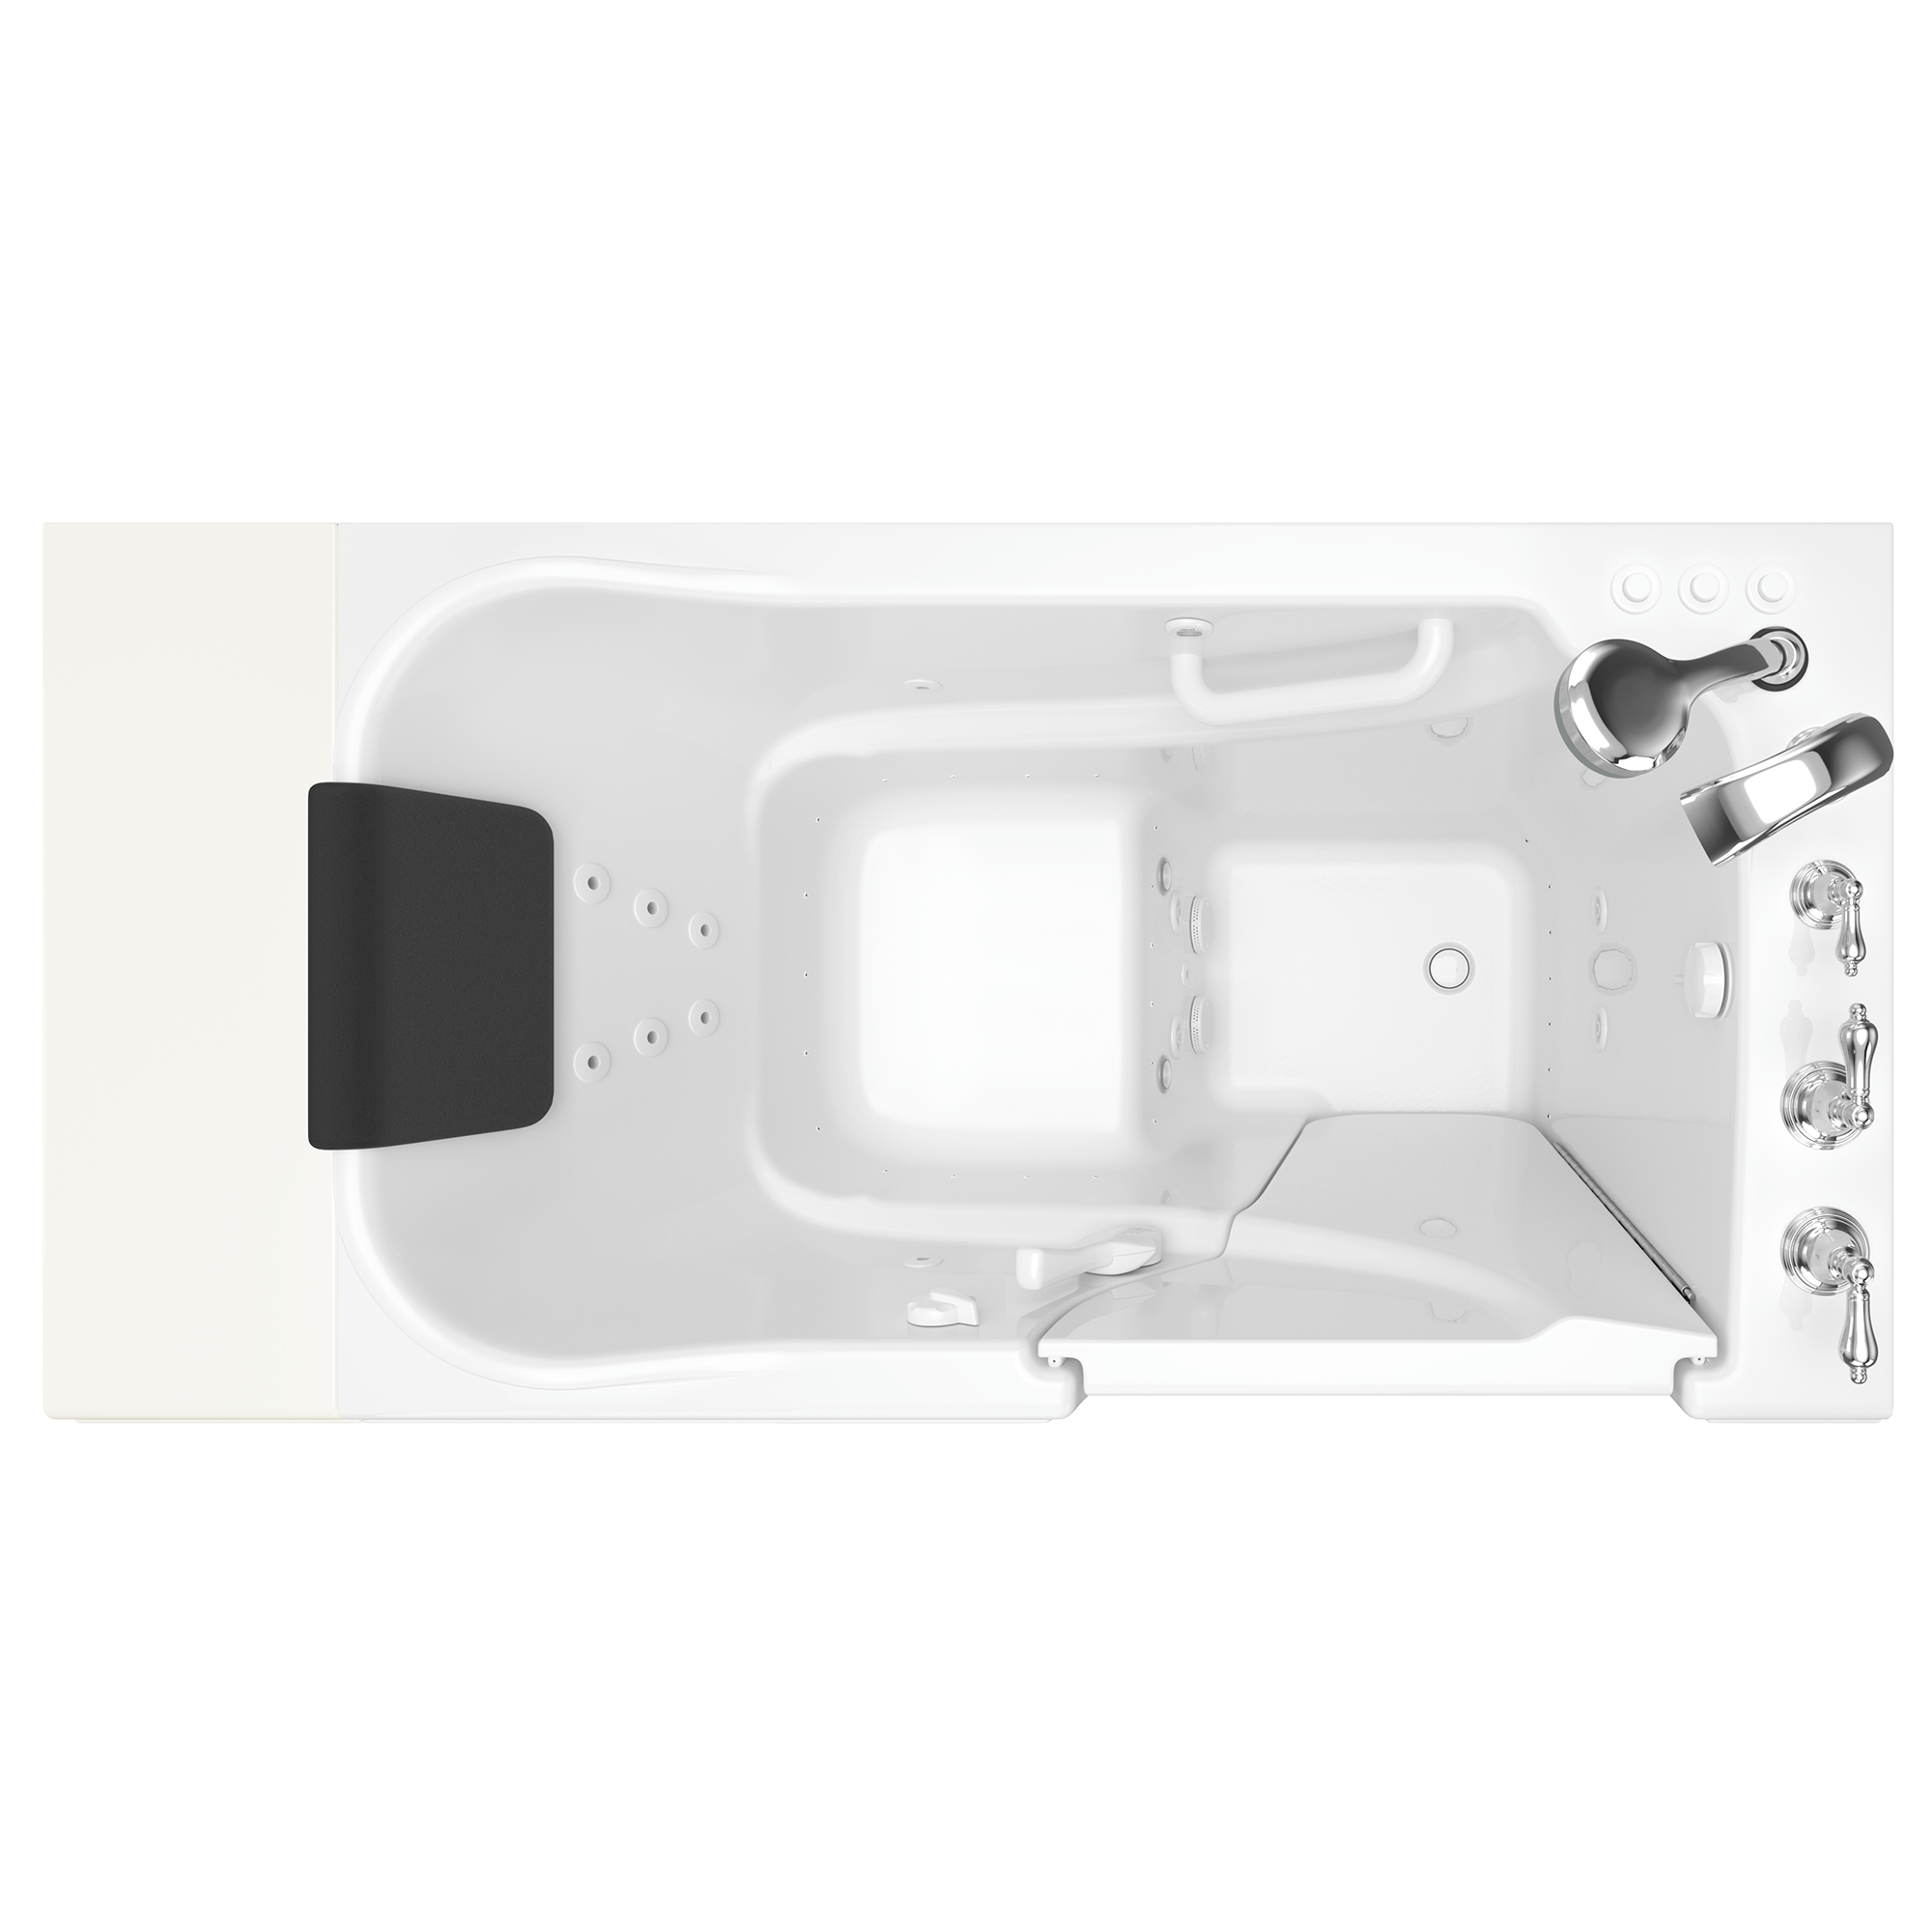 Gelcoat Premium Series 30 x 52  Inch Walk in Tub With Combination Air Spa and Whirlpool Systems   Right Hand Drain With Faucet WIB WHITE